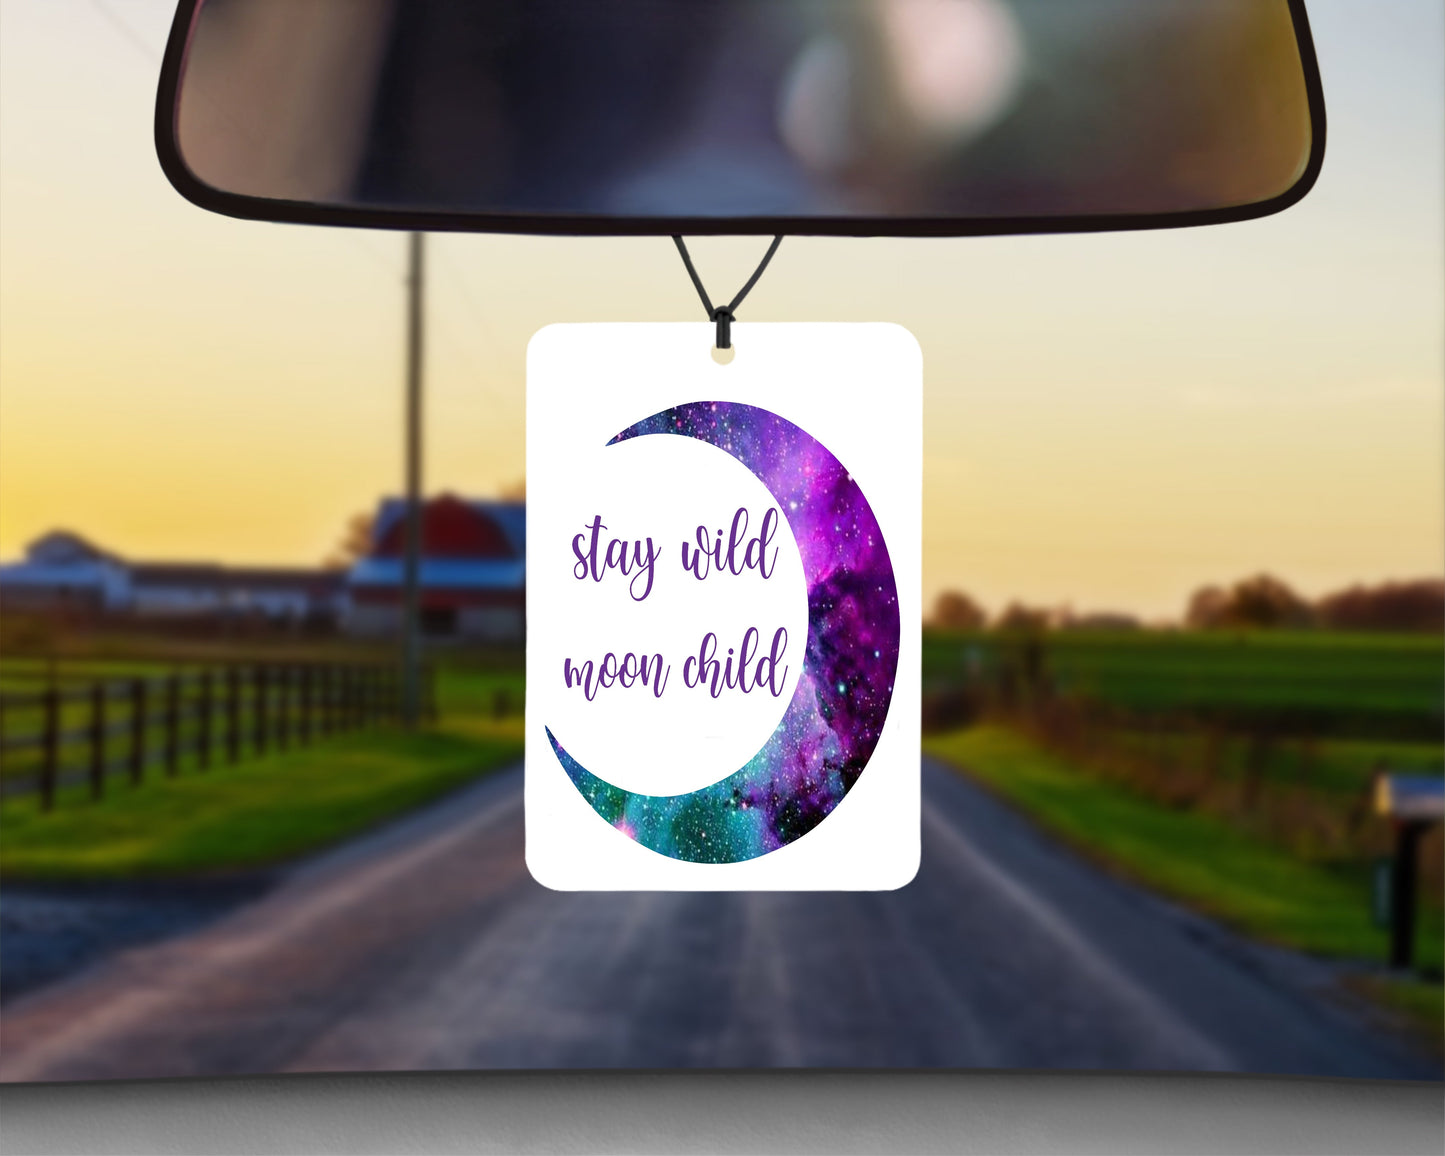 Stay Wild Moon Child|Freshie|Includes Scent Bottle - Vehicle Air Freshener